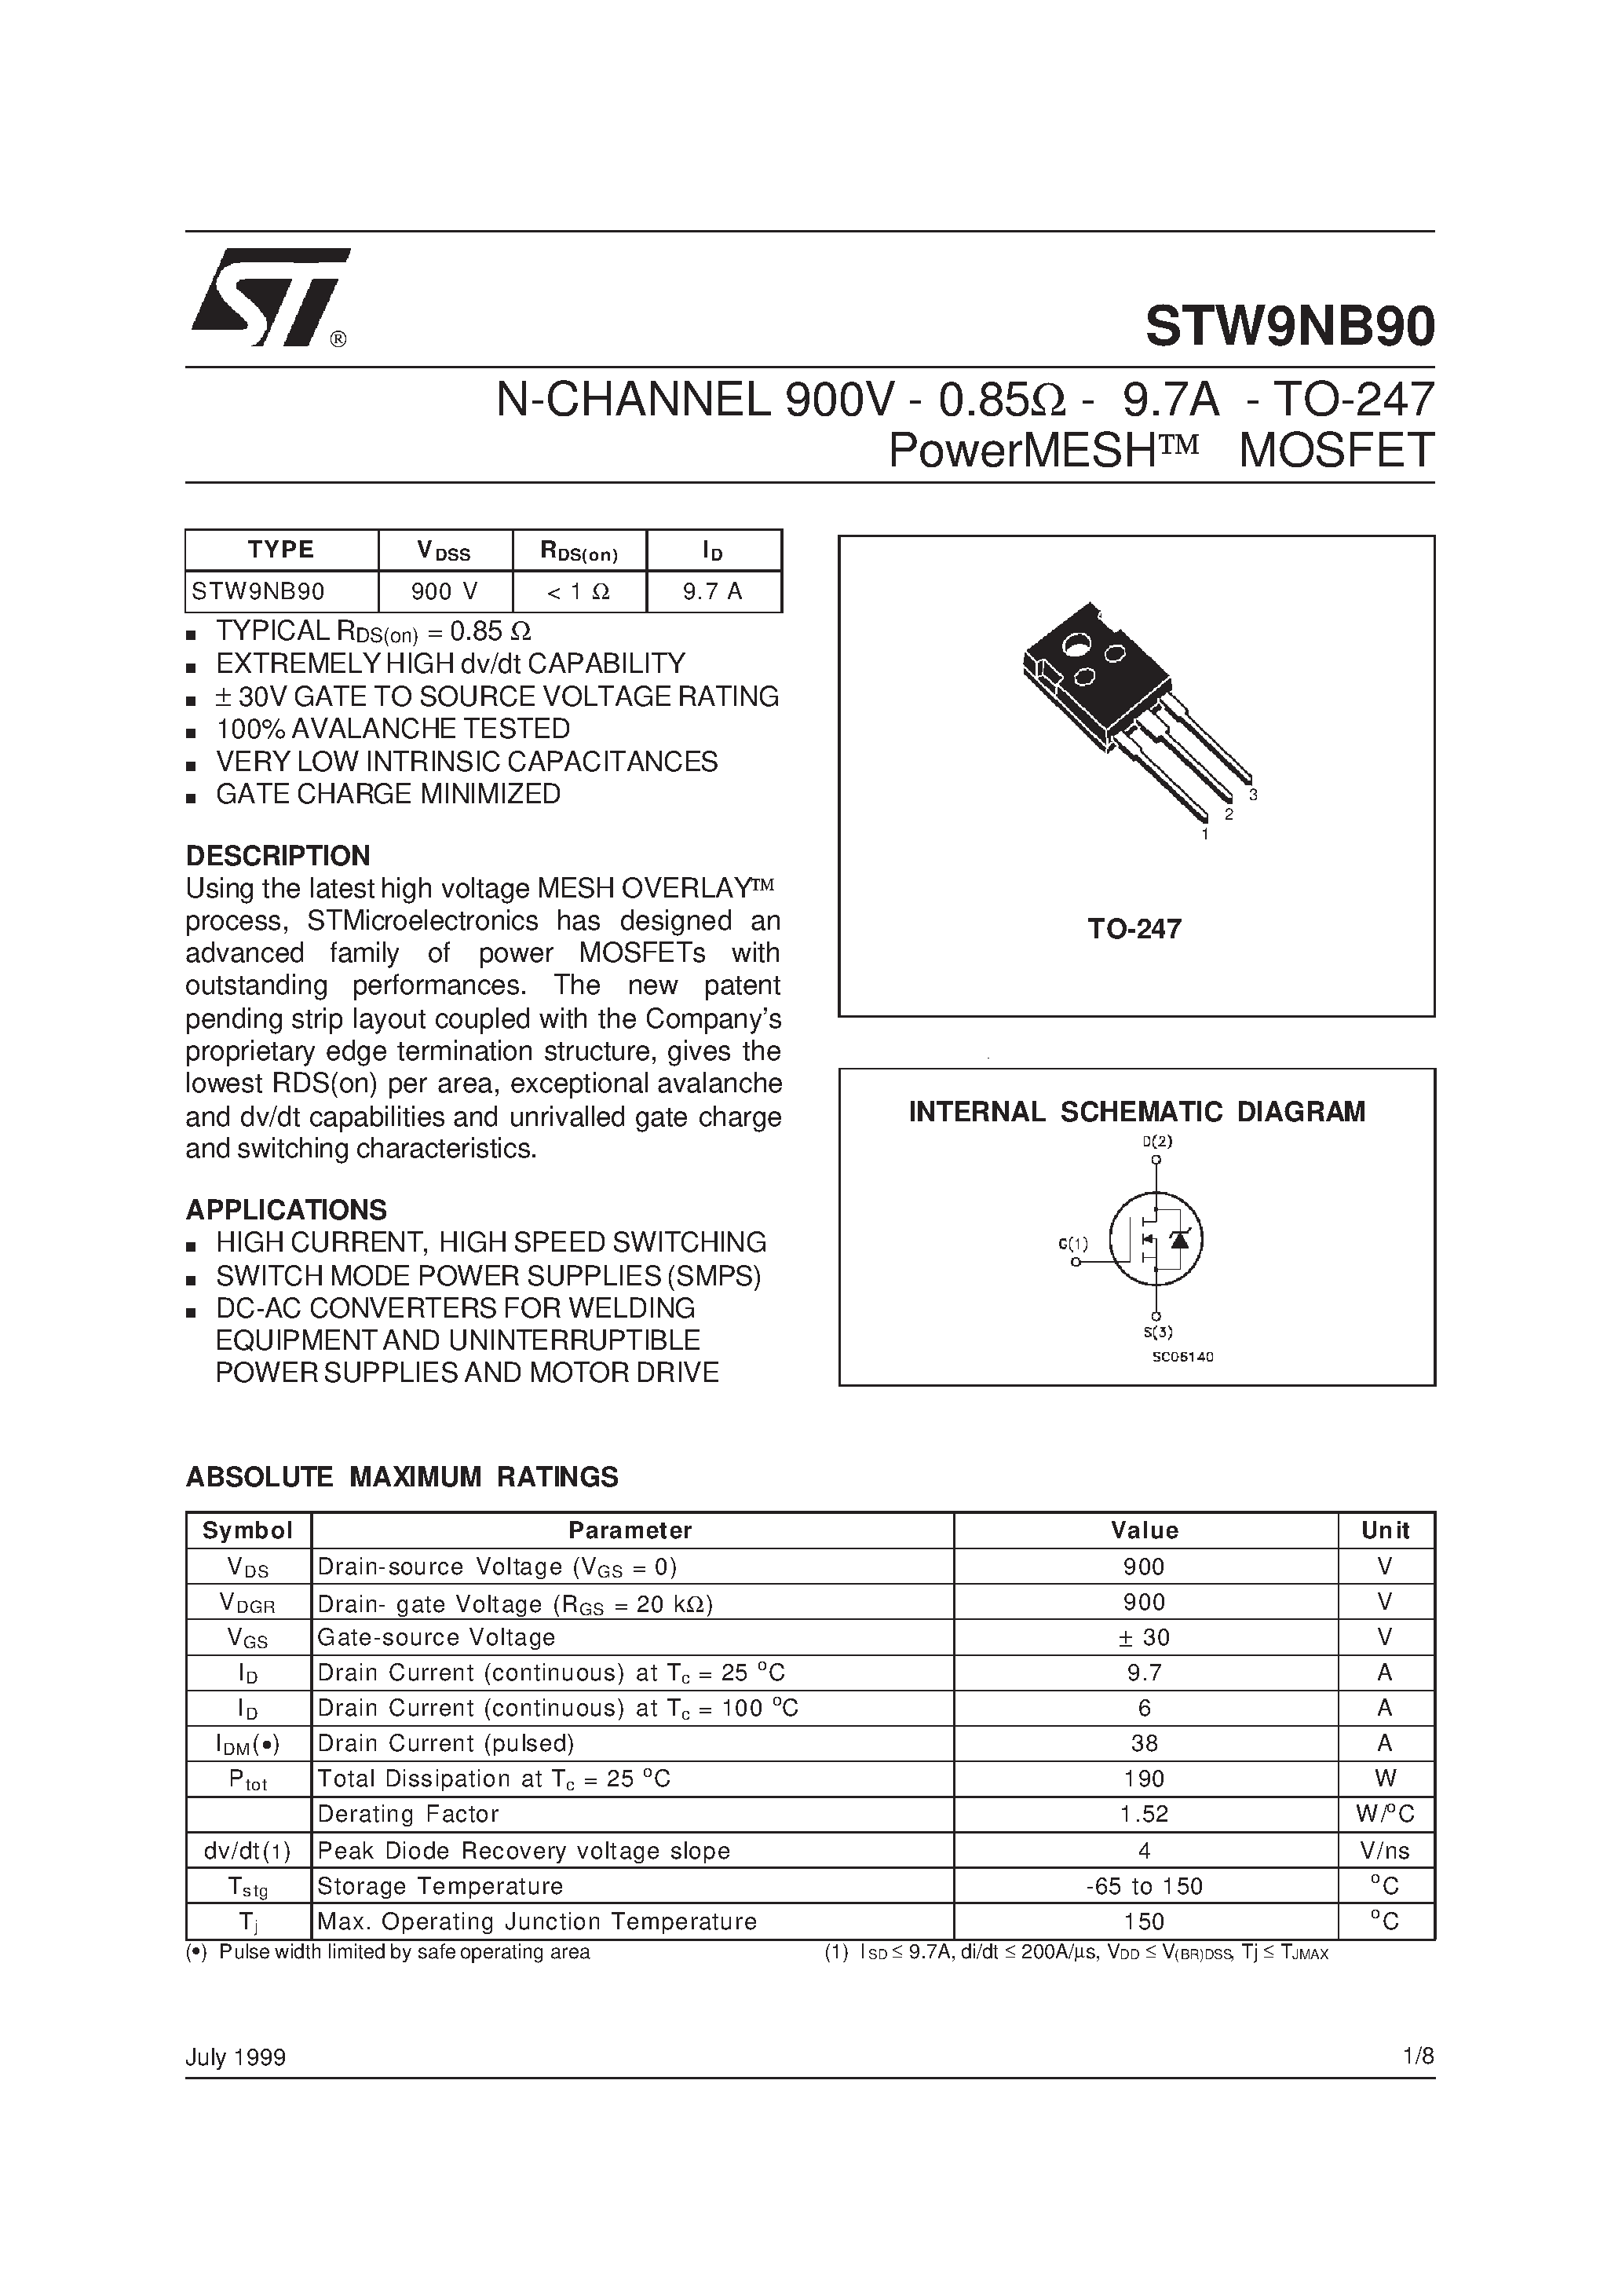 Datasheet STW9NB90 - N-CHANNEL 900V - 0.85ohm - 9.7A - TO-247 PowerMESH MOSFET page 1